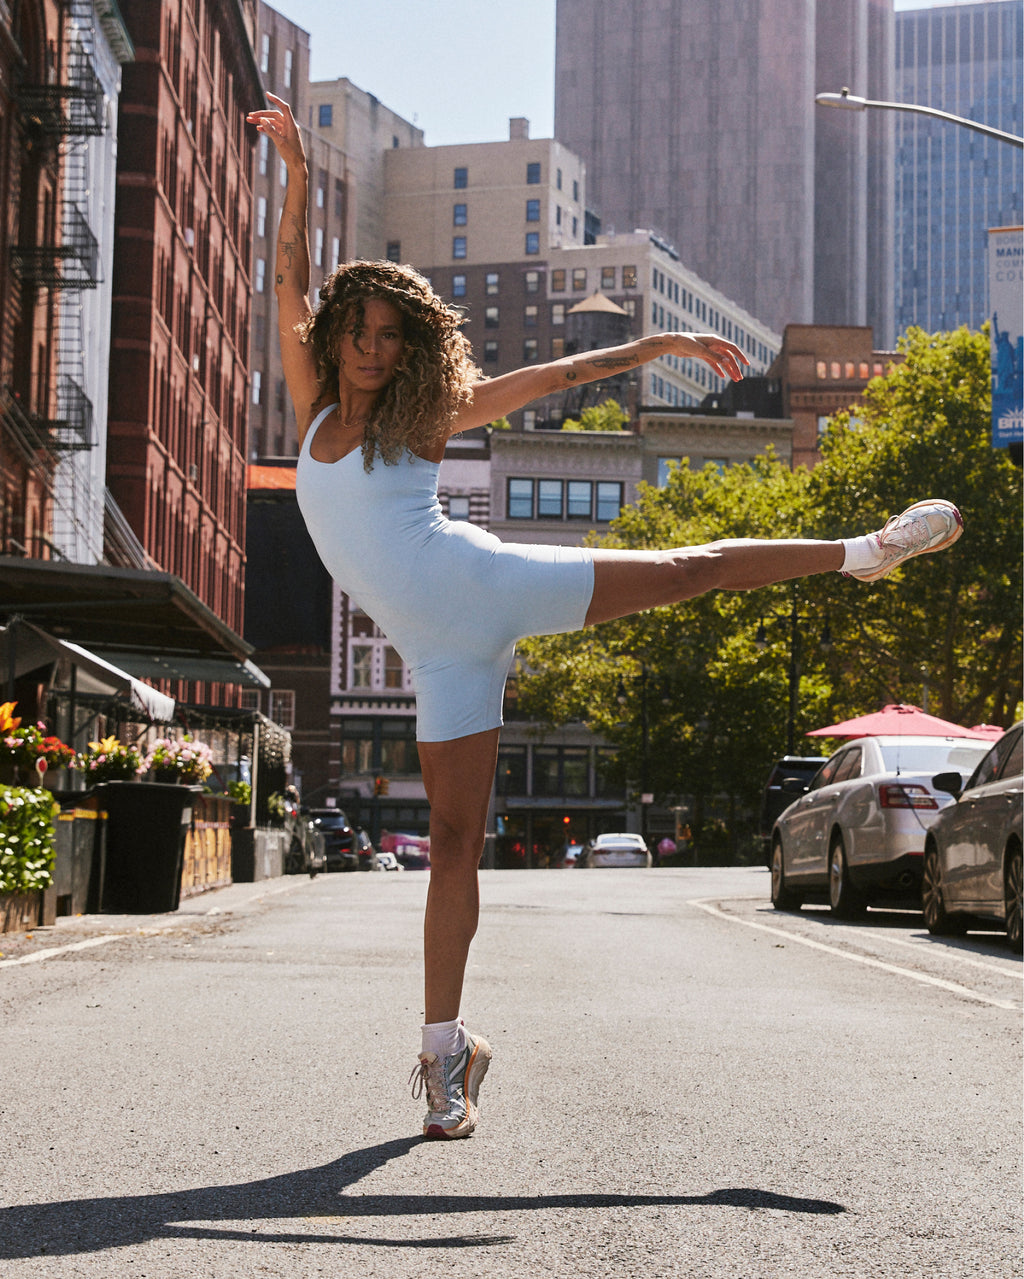 Holly James dancing in the street in New York